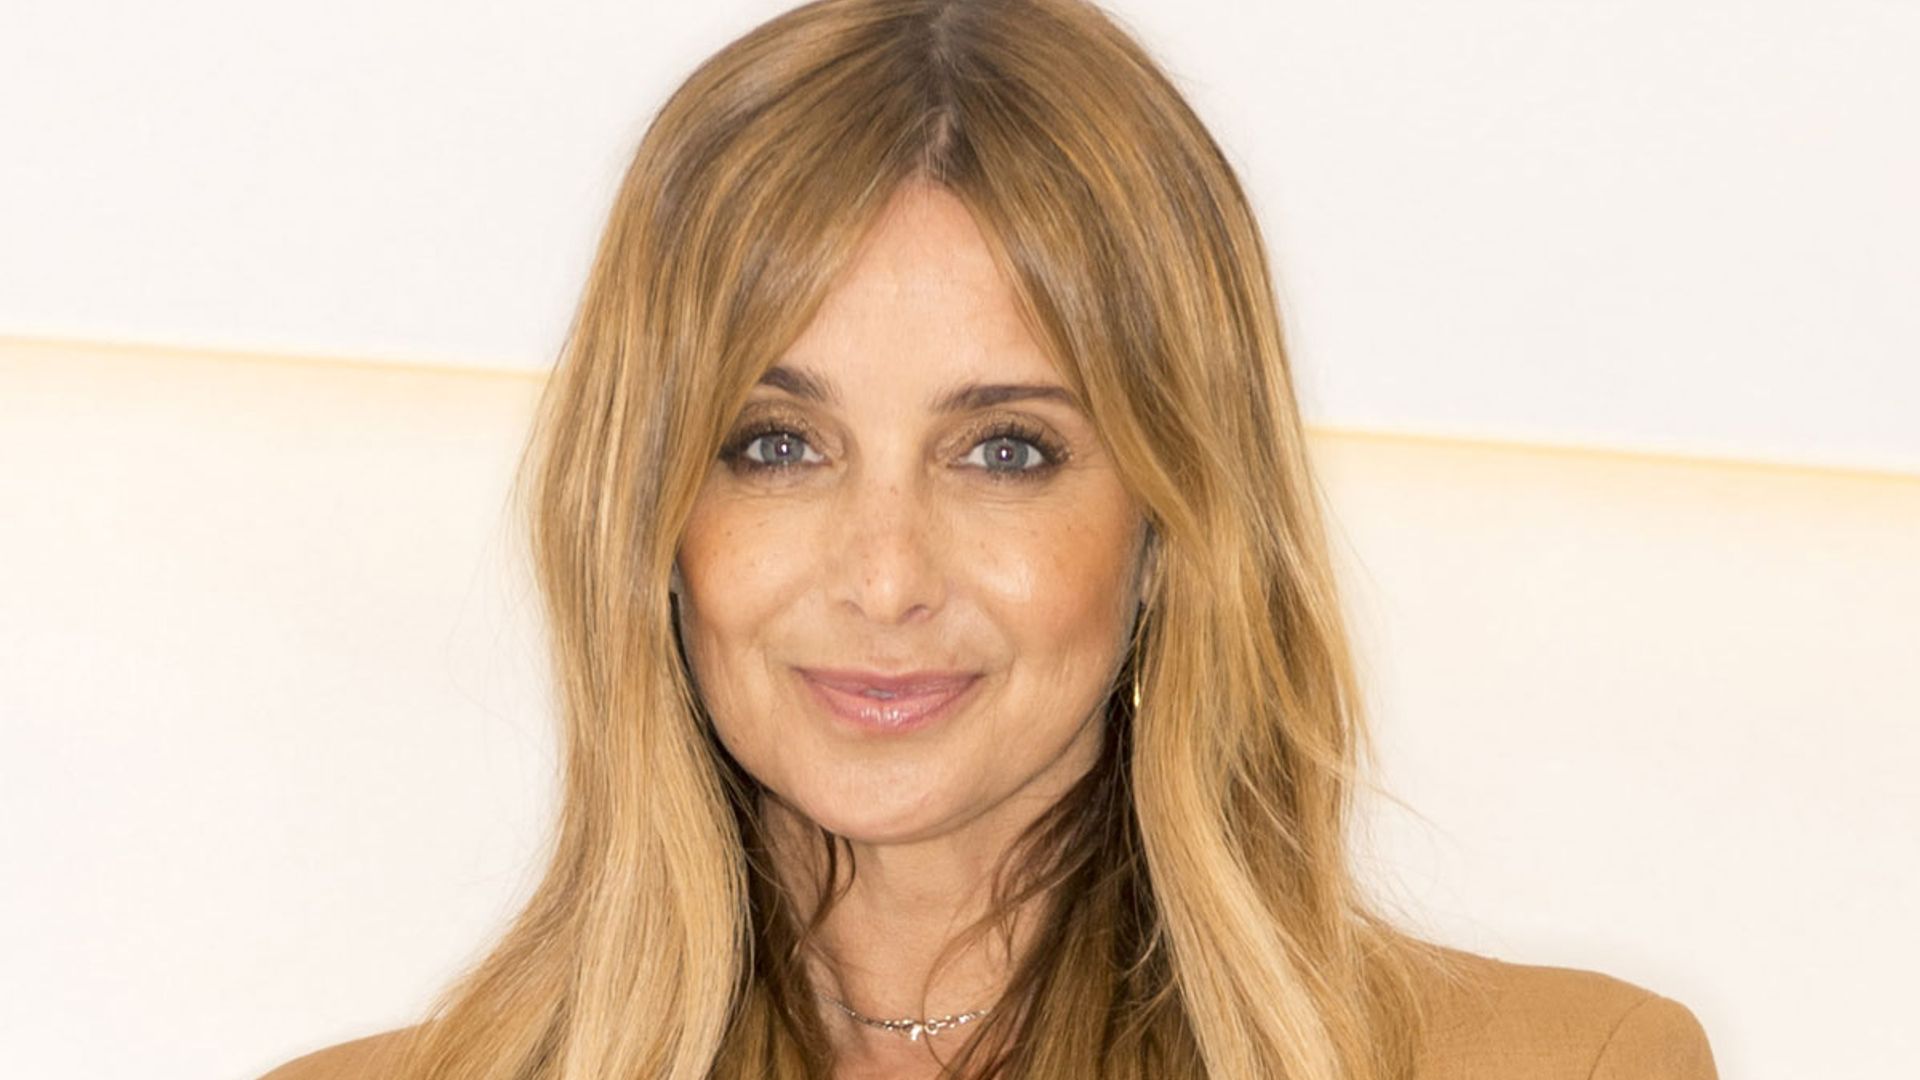 Louise Redknapp stuns fans in sheer lace blouse – and wow